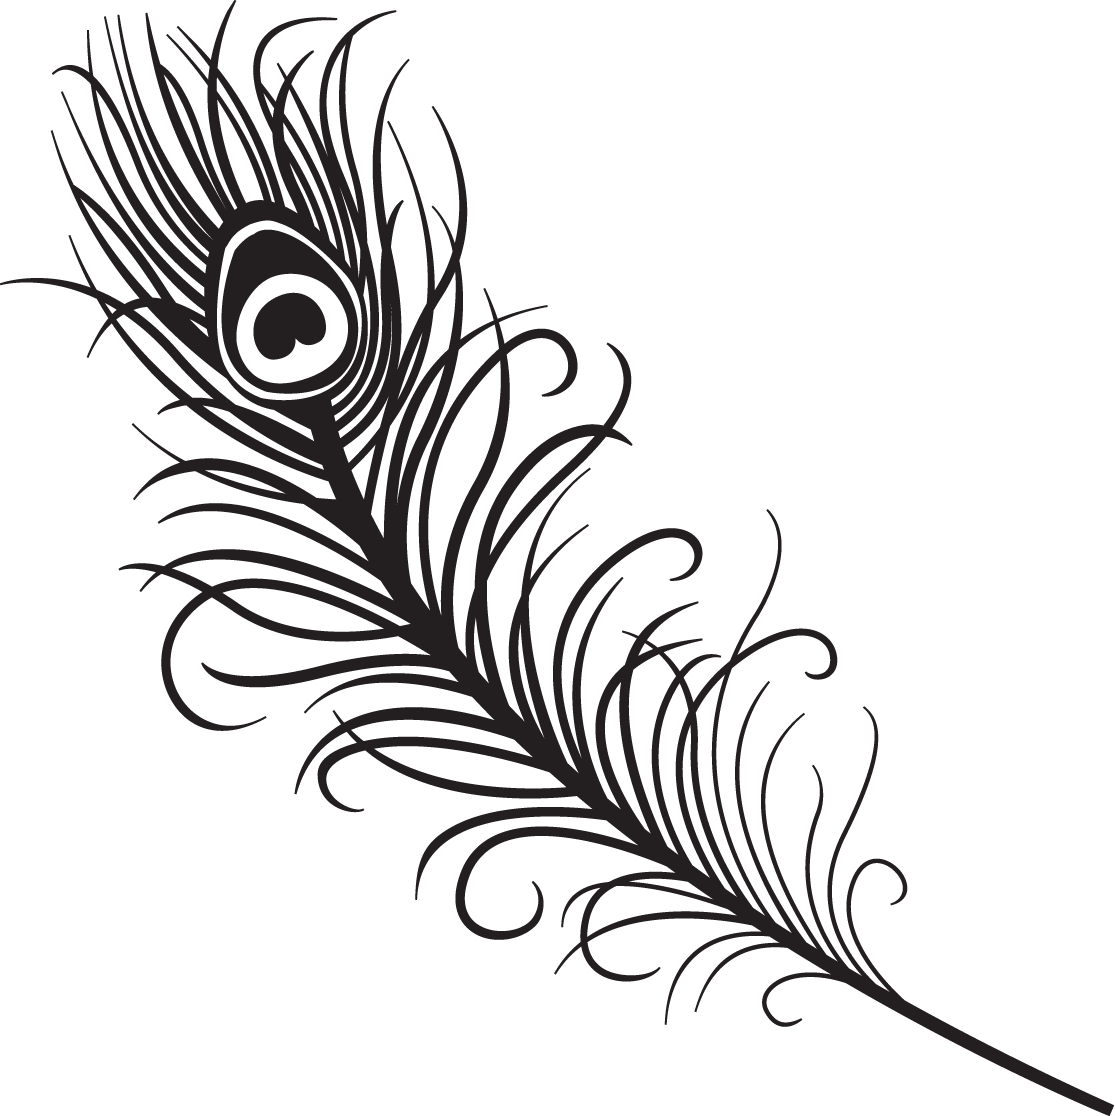 Peacock Feather Clipart Black And White   Clipart Panda   Free Clipart